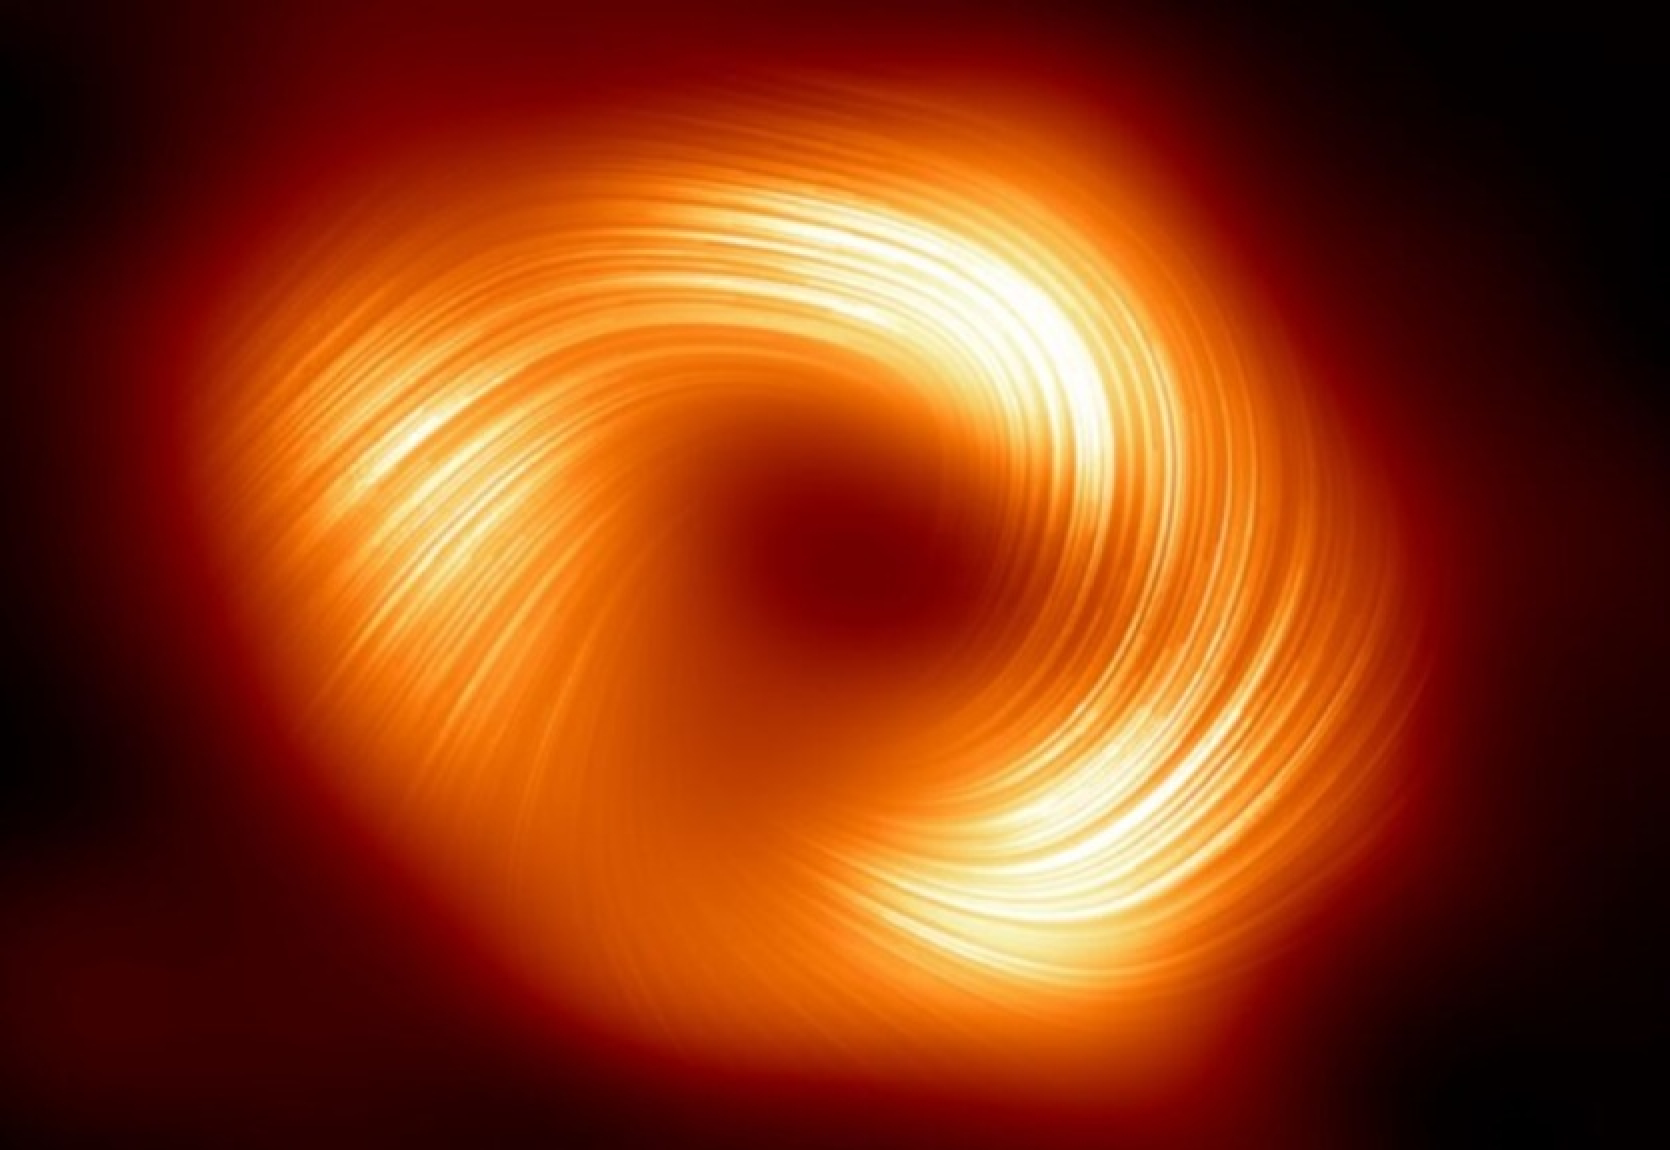 The Event Horizon Telescope has for the first time detected the magnetic fields that surround Sagittarius A, the supermassive black hole at the center of our Galaxy